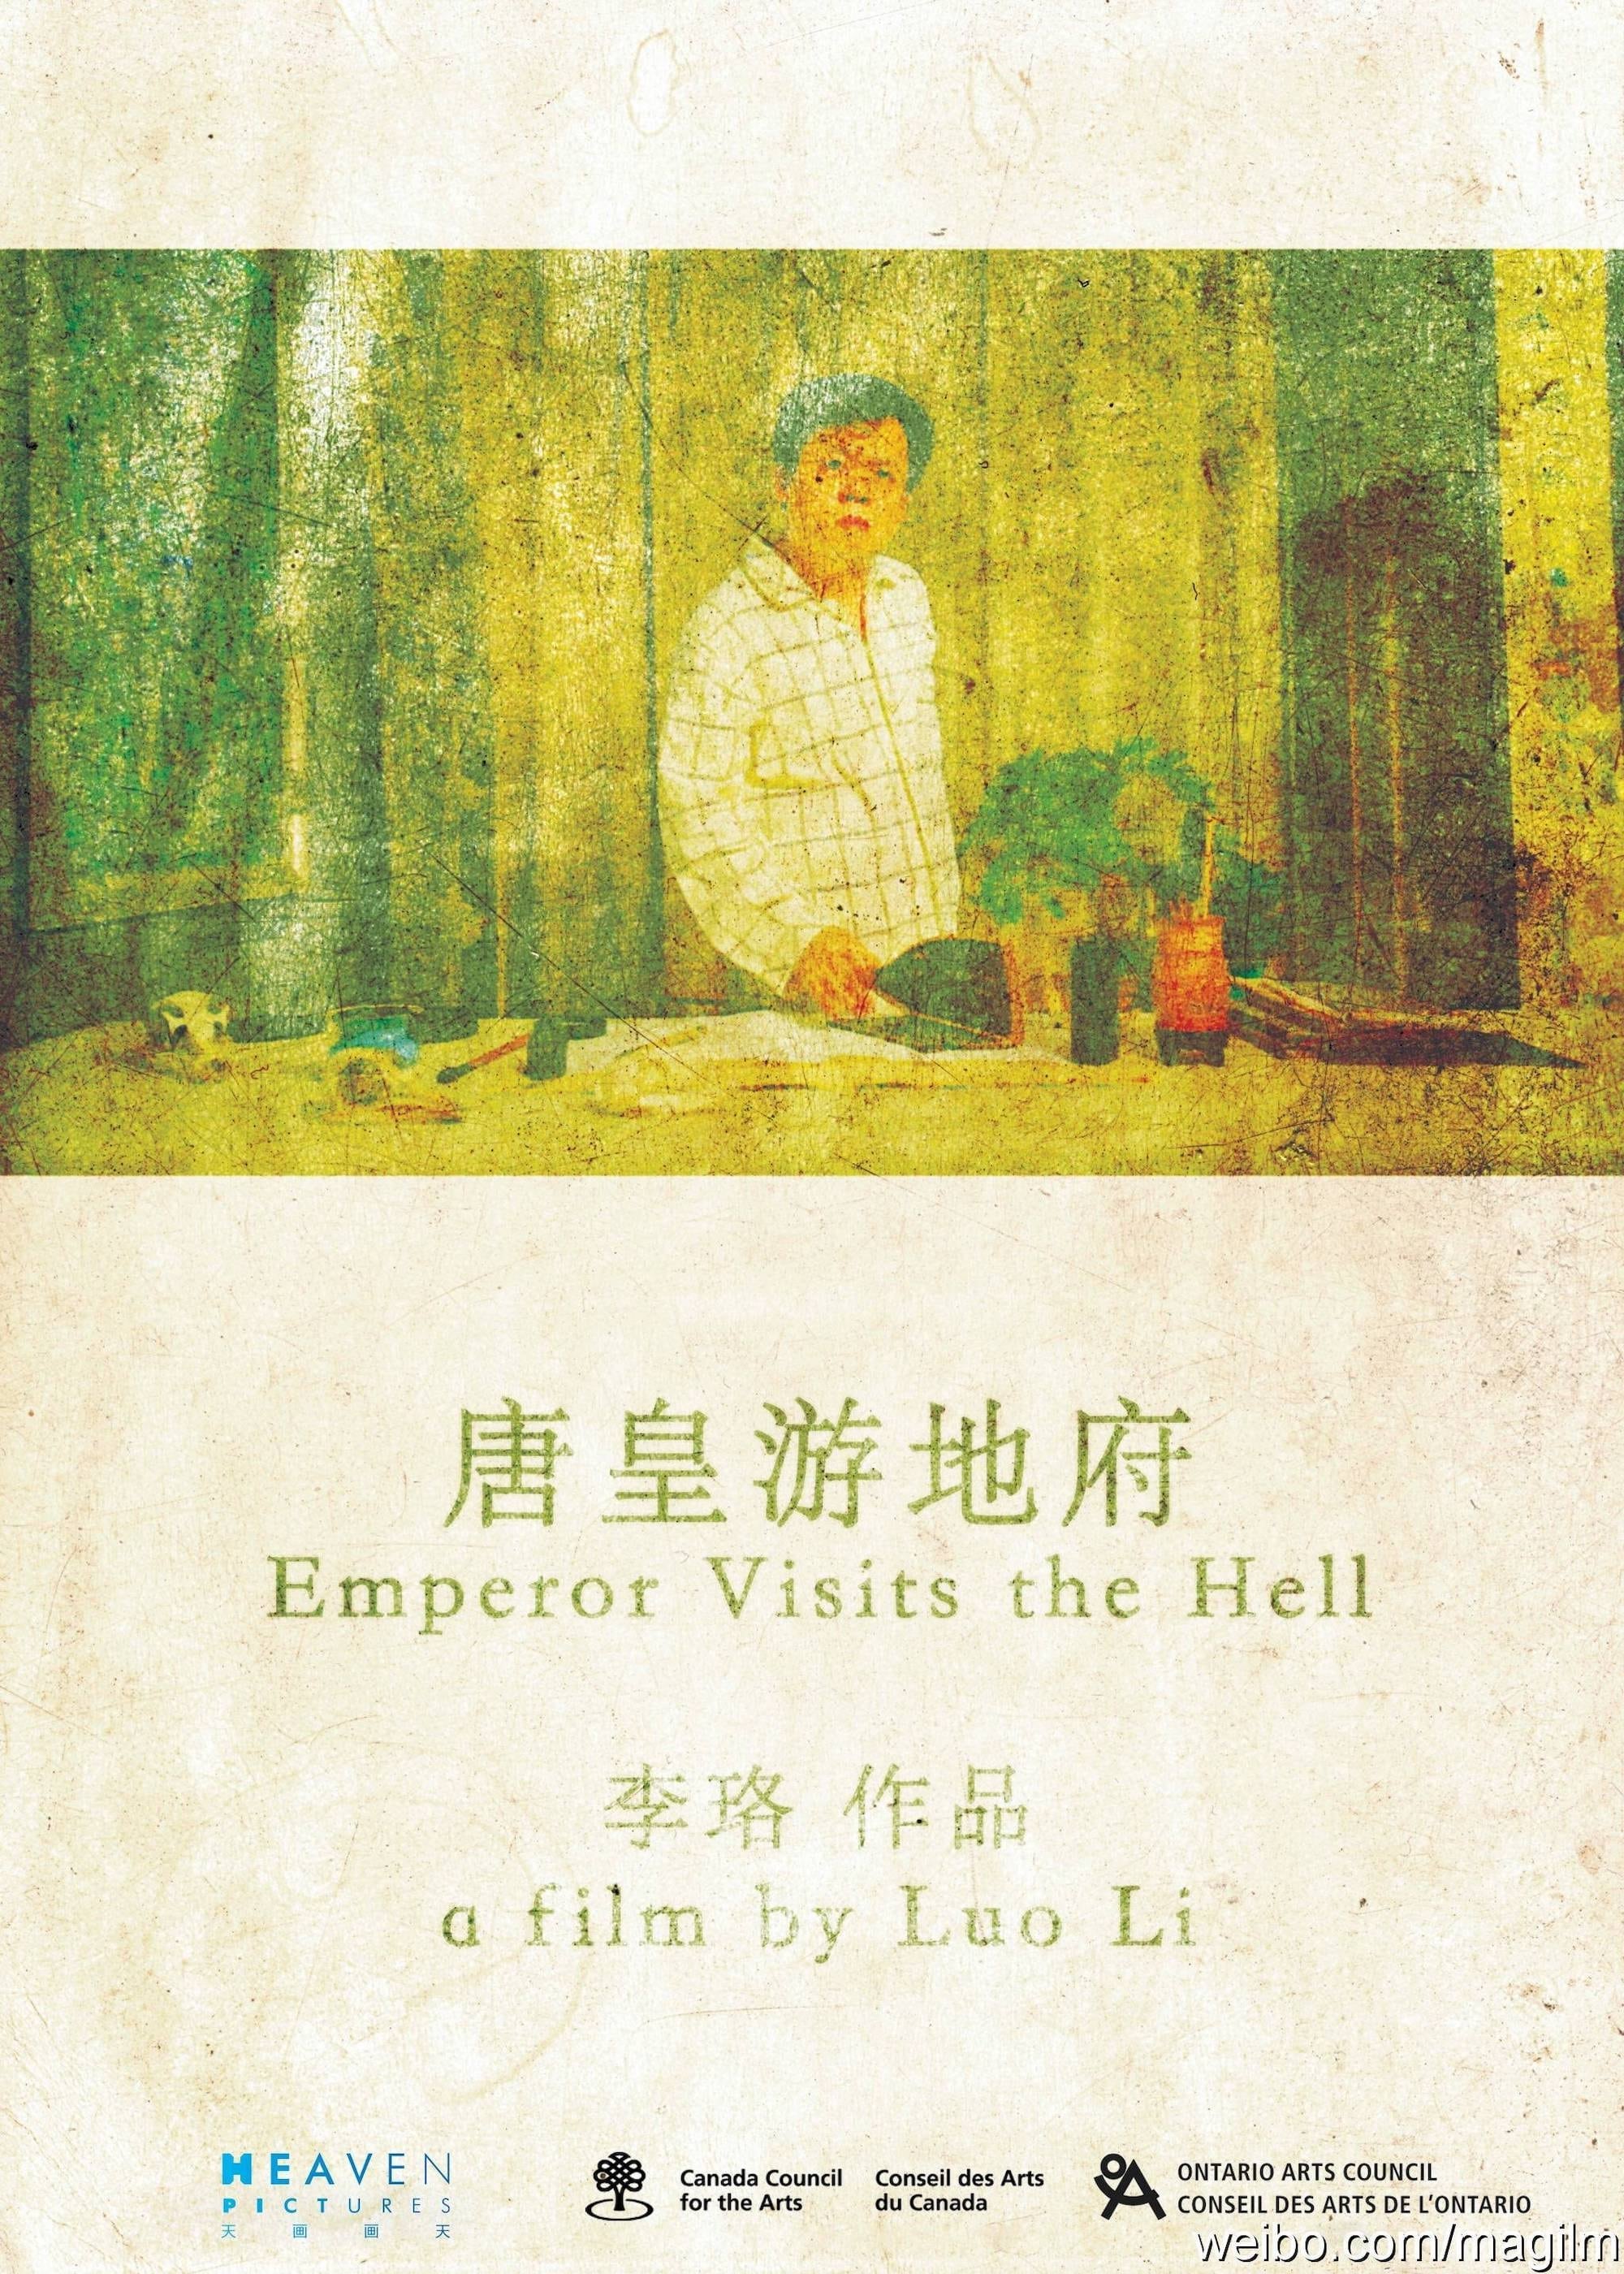 Emperor Visits the Hell